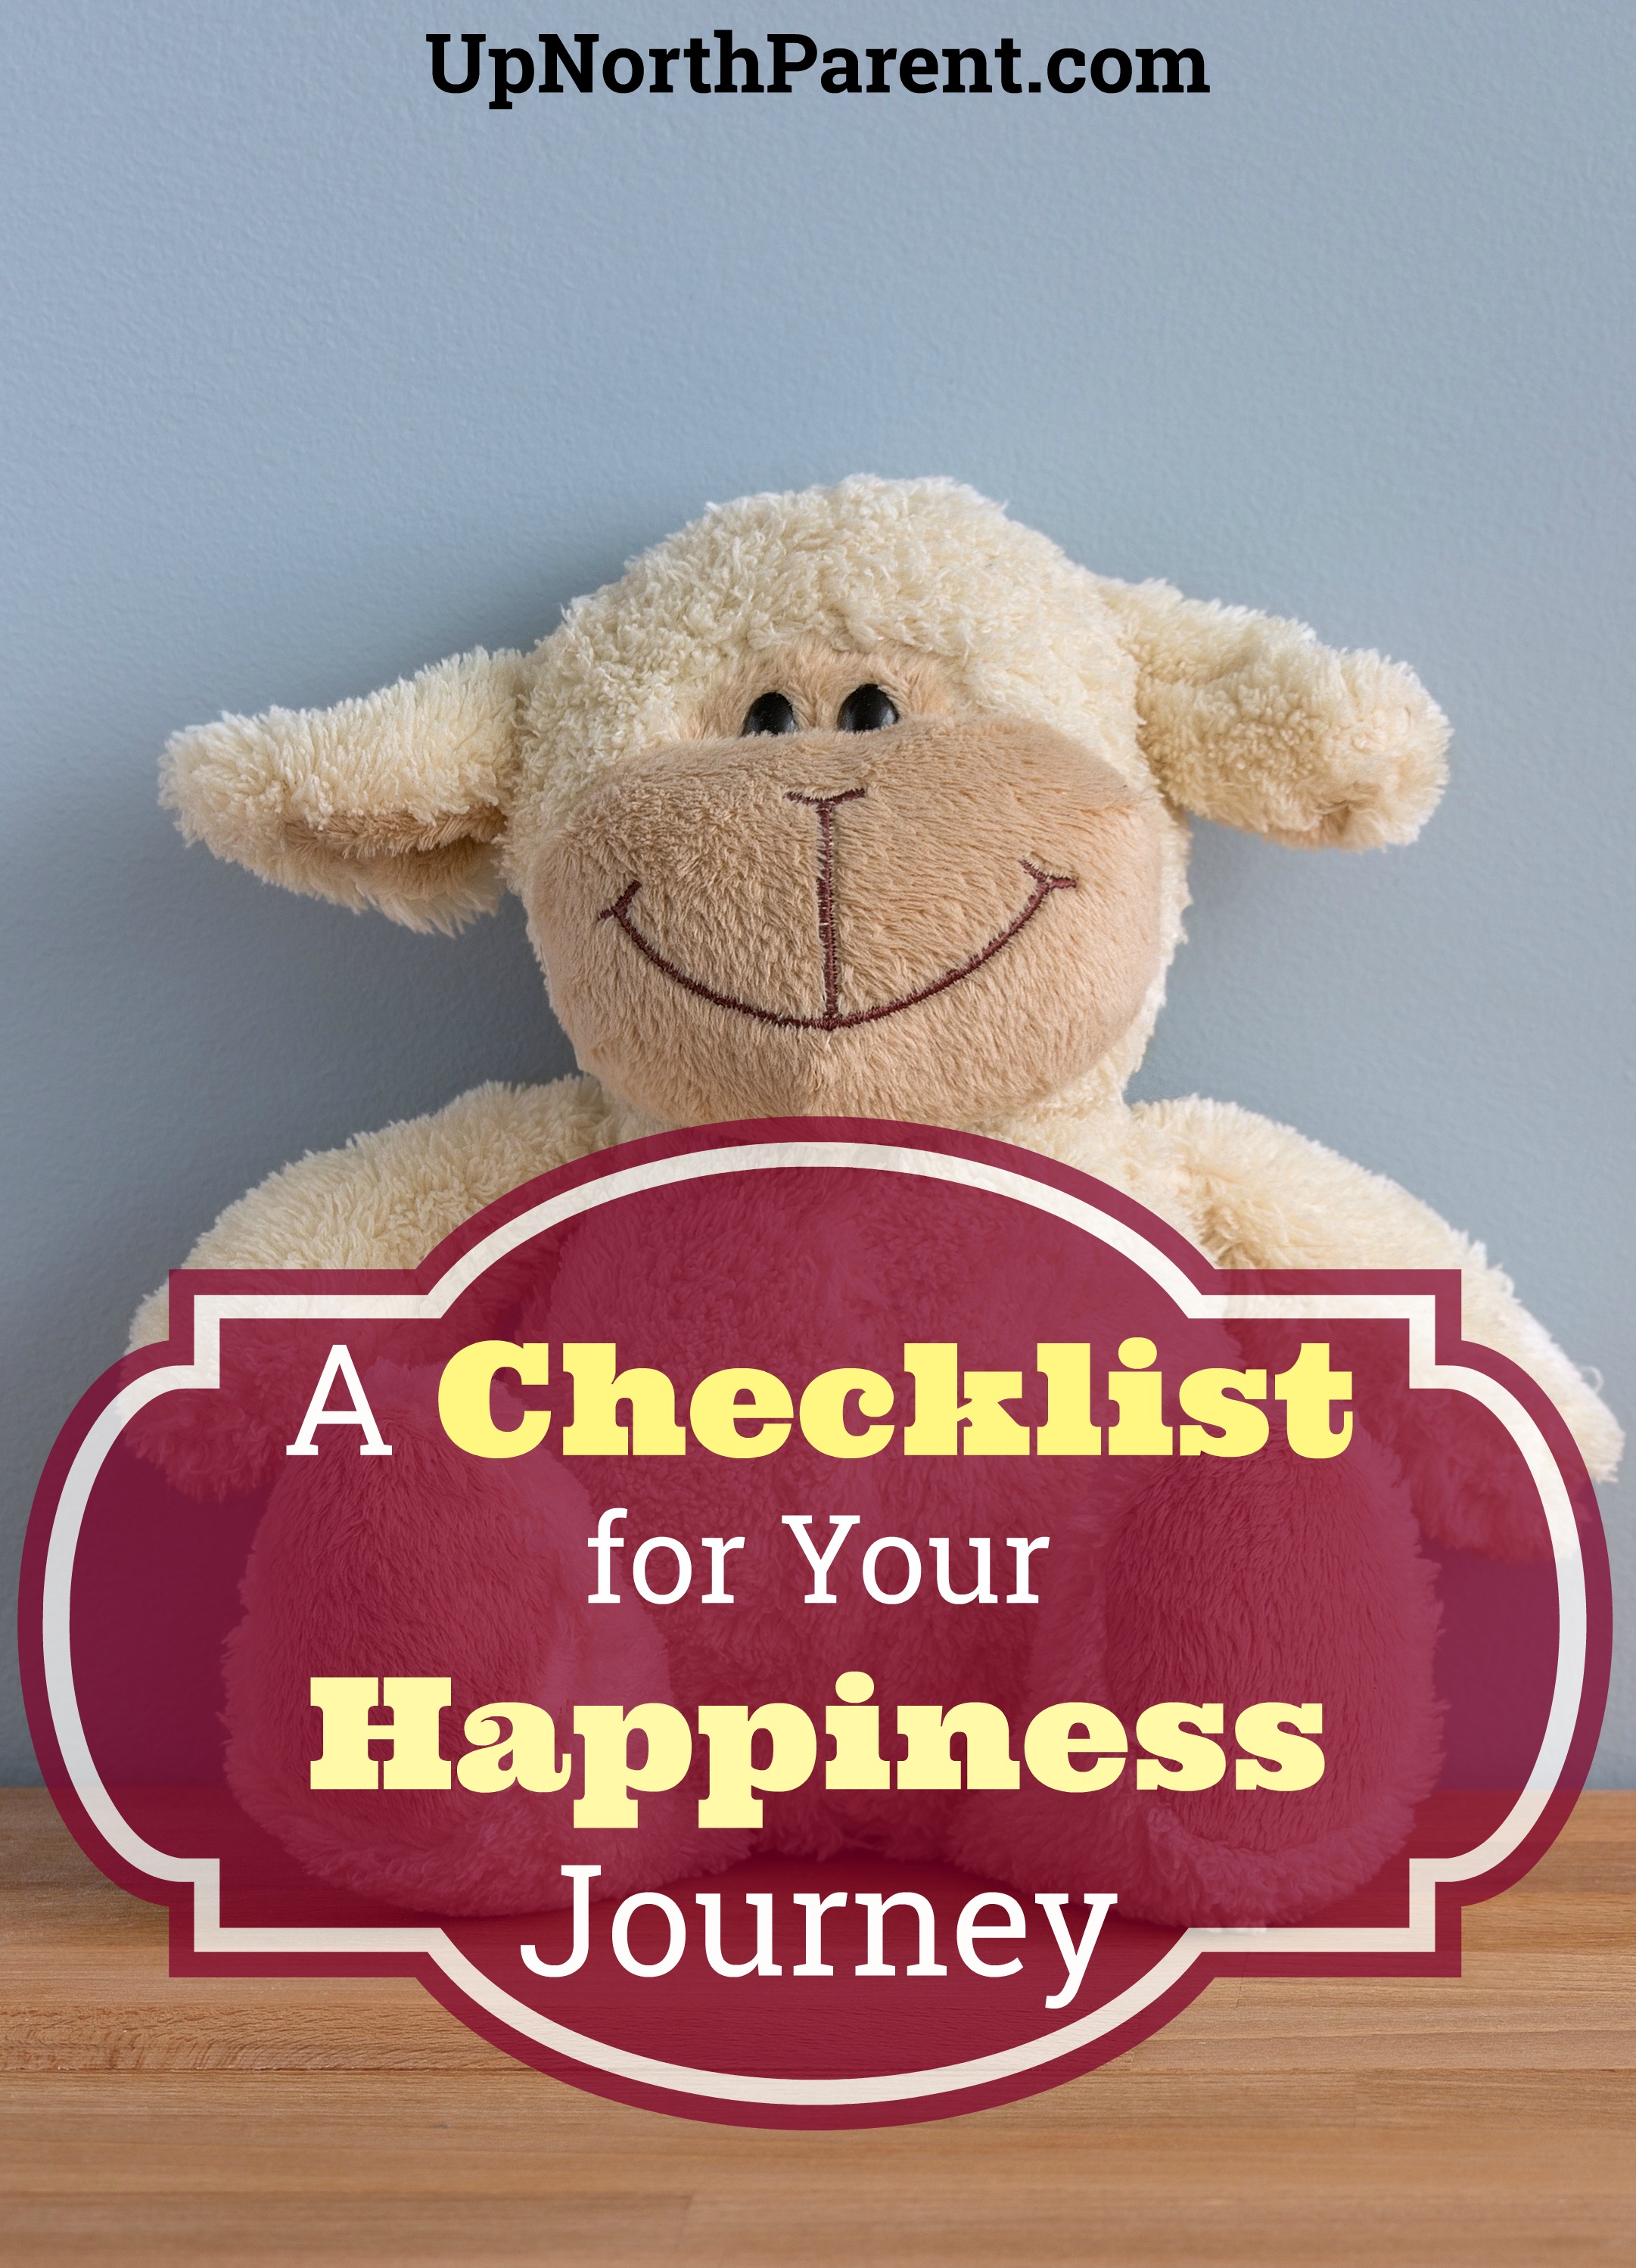 A Checklist for Your Happiness Journey